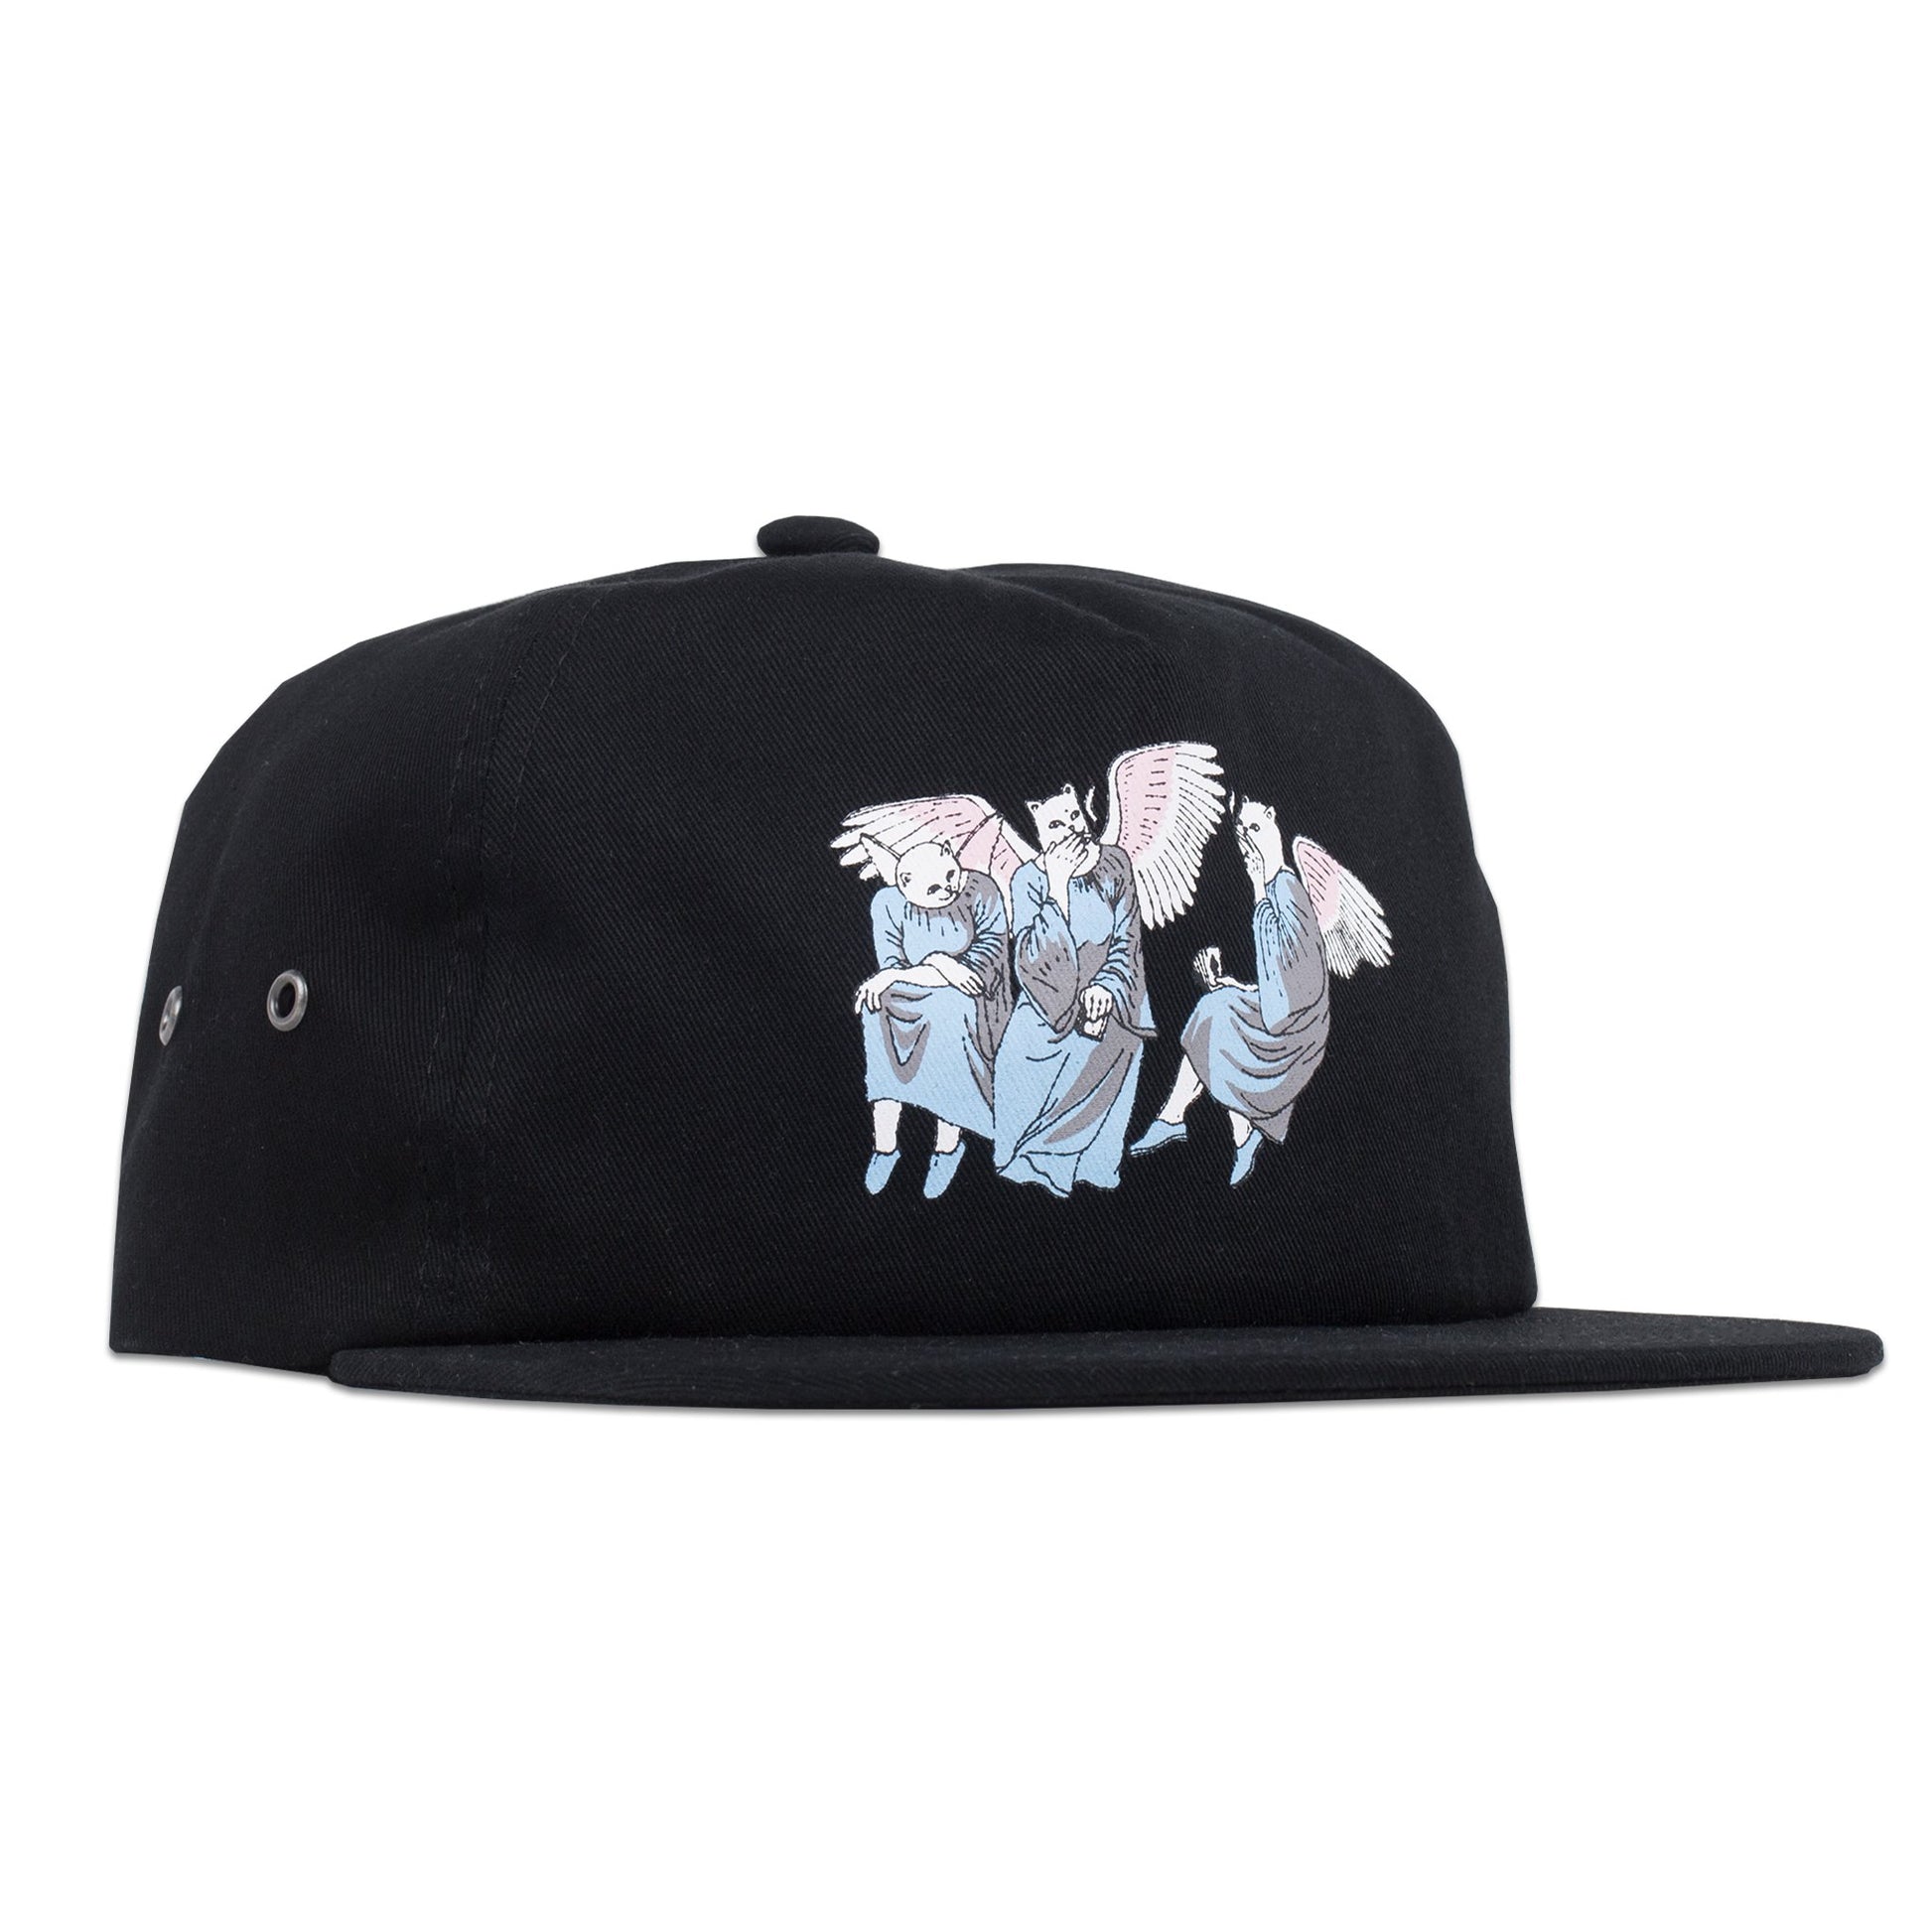 RIPNDIP - Heaven And Hell 6 Panel Hat, Black - The Giant Peach